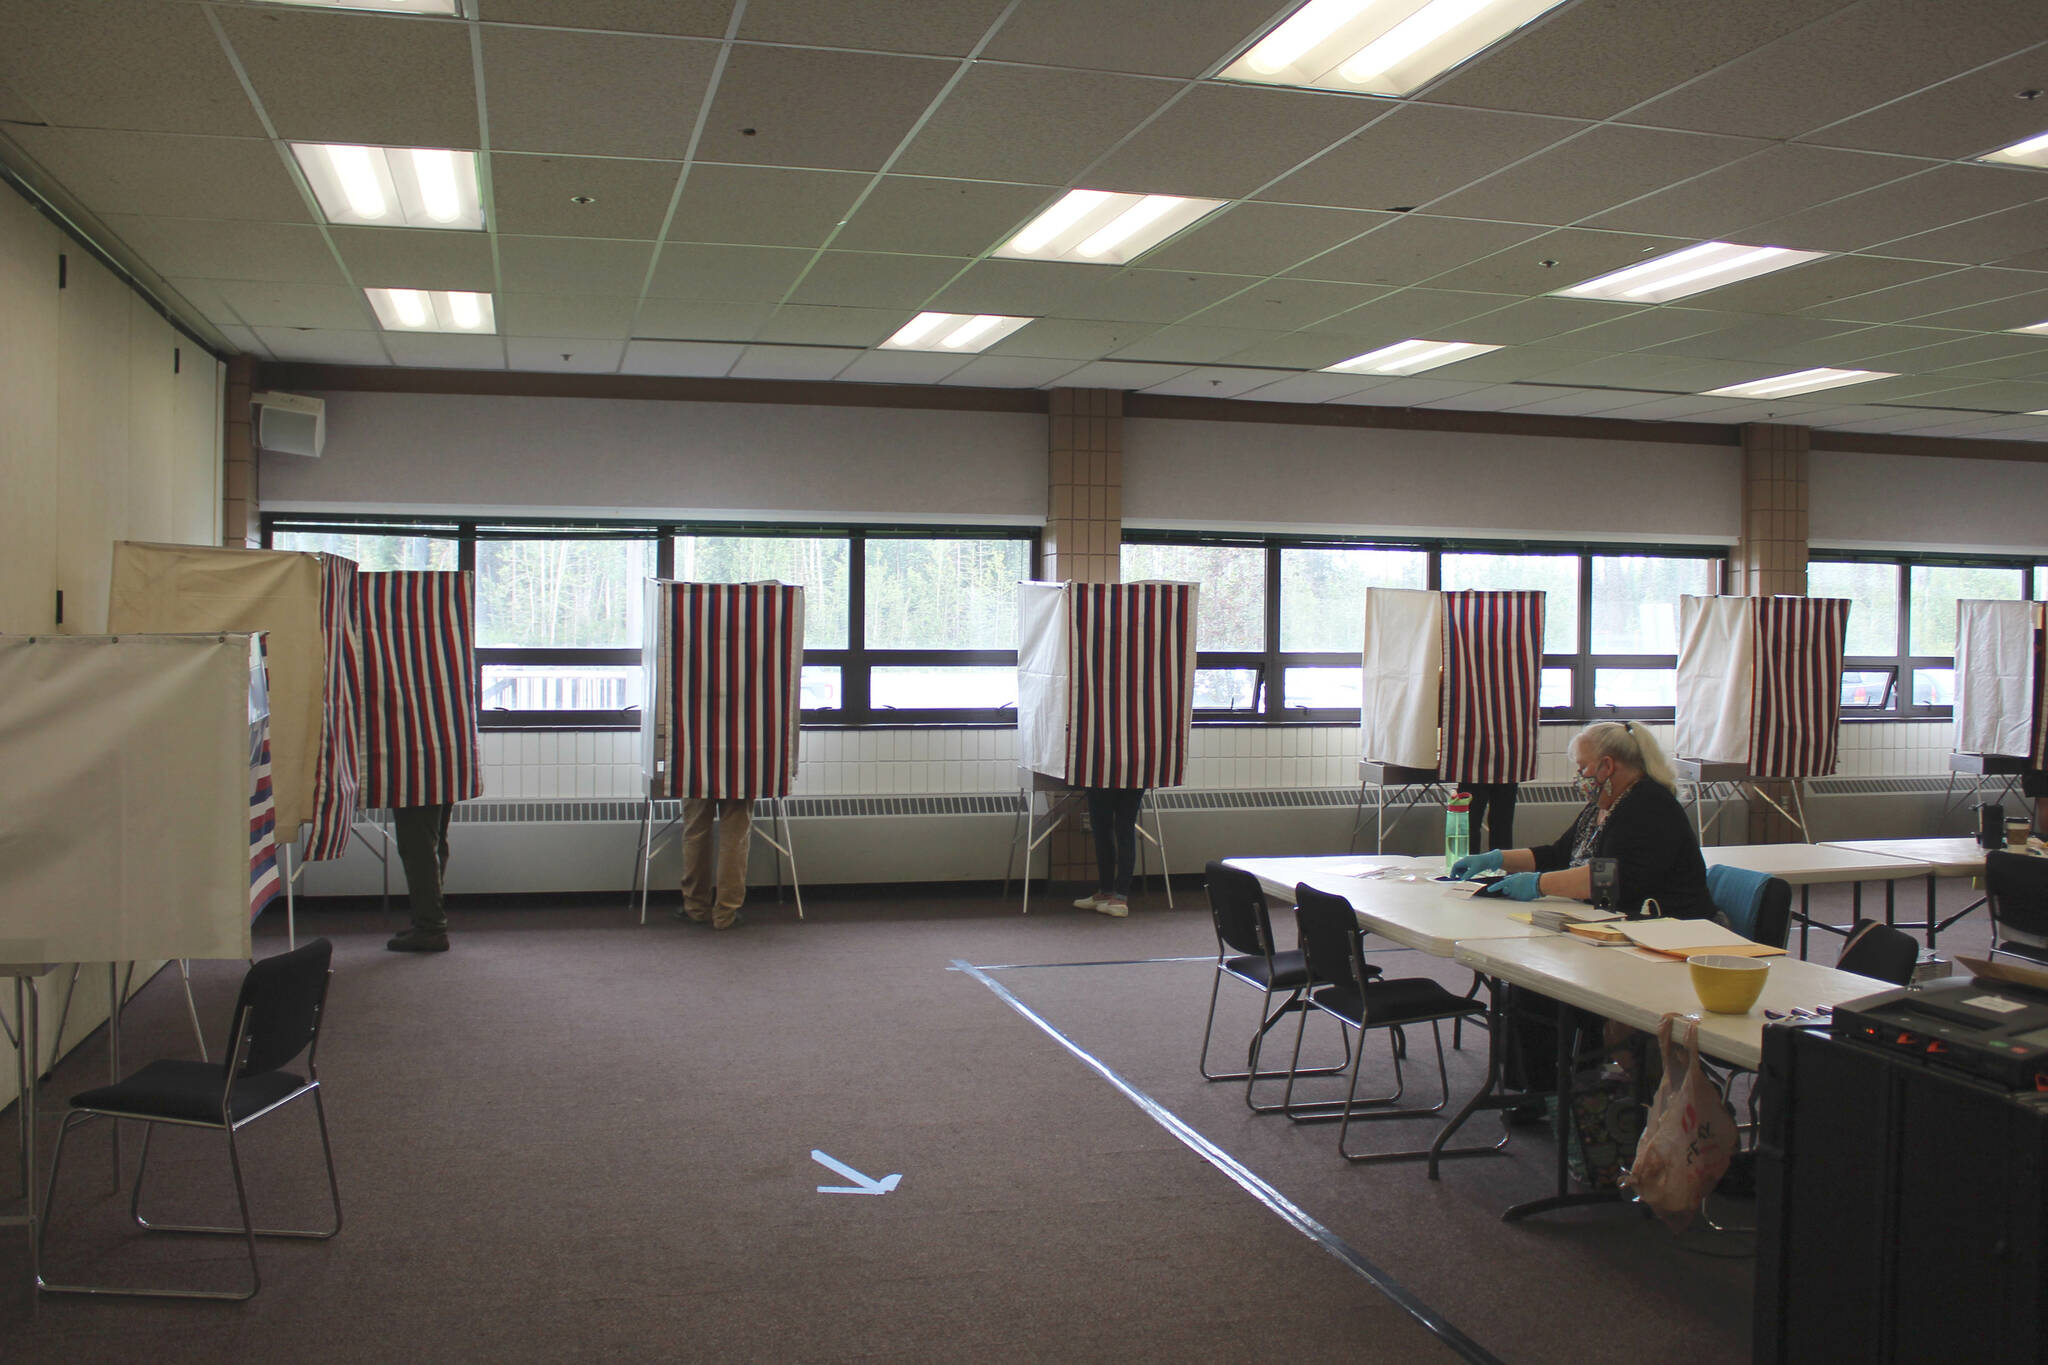 Voters cast ballots in Alaska’s special general and regular primary elections at the Soldotna Regional Sports Complex on Tuesday, Aug. 16, 2022, in Soldotna, Alaska. (Ashlyn O’Hara/Peninsula Clarion)